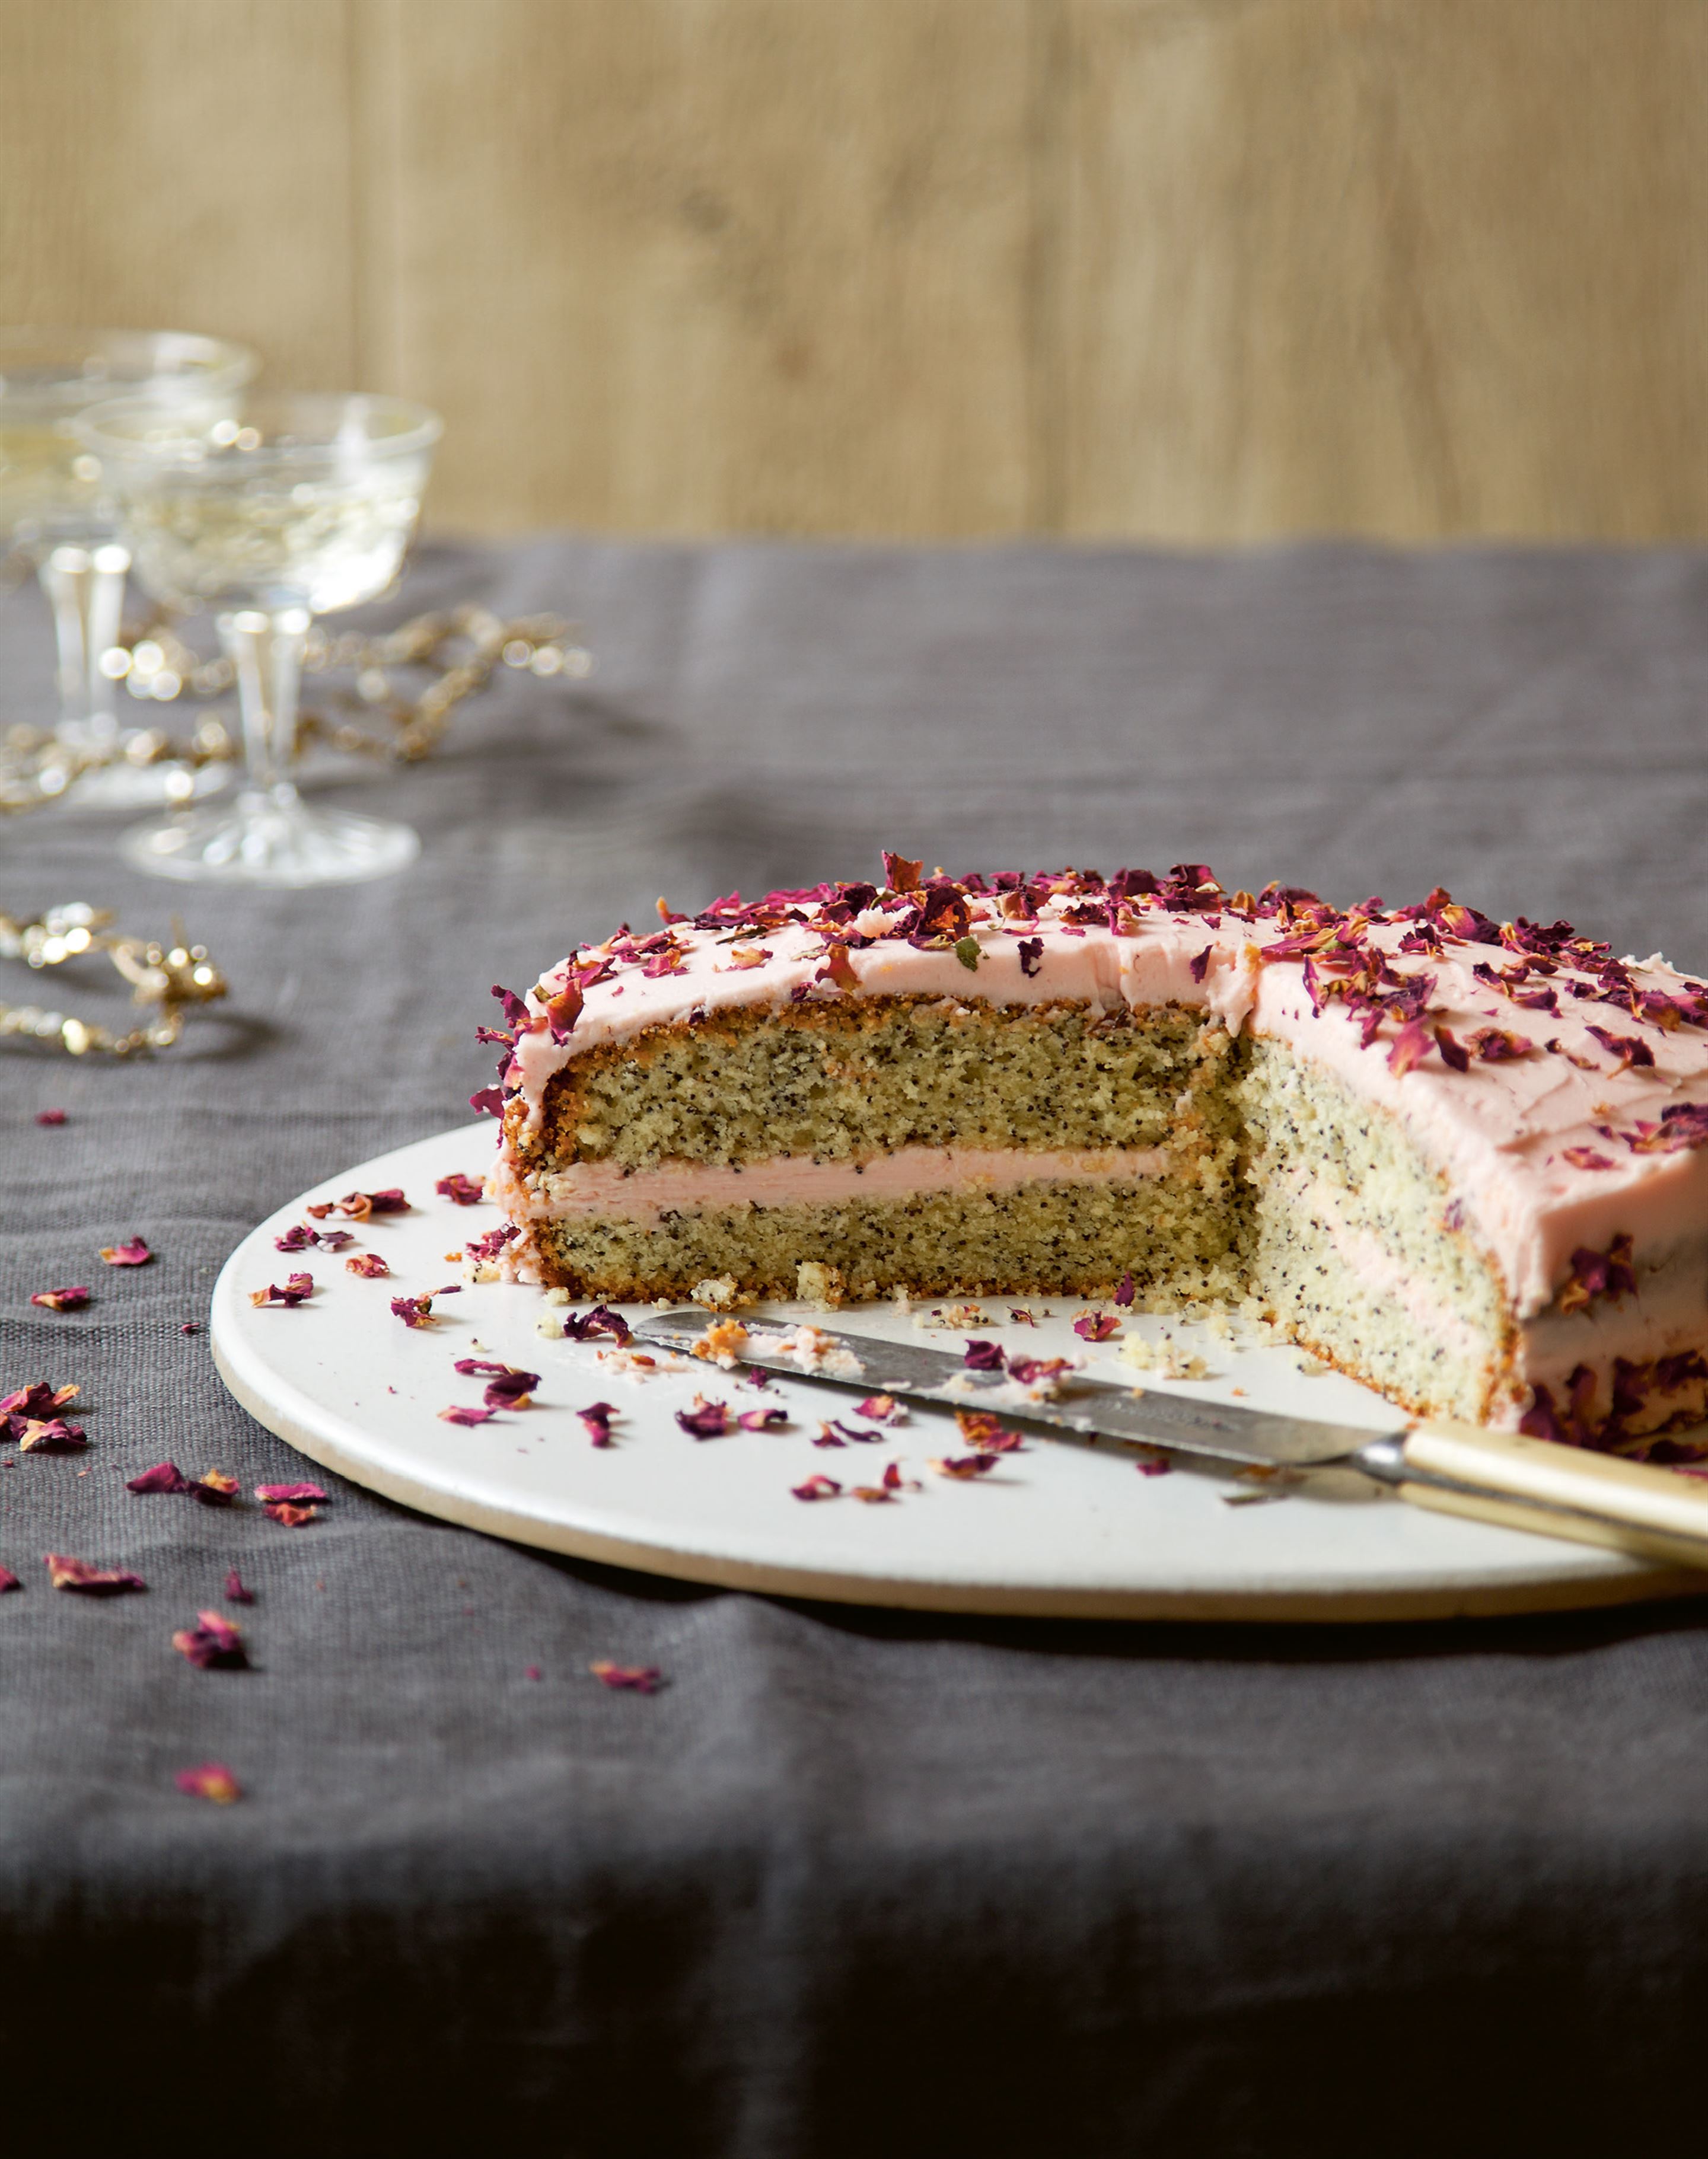 Rose and poppy seed cake